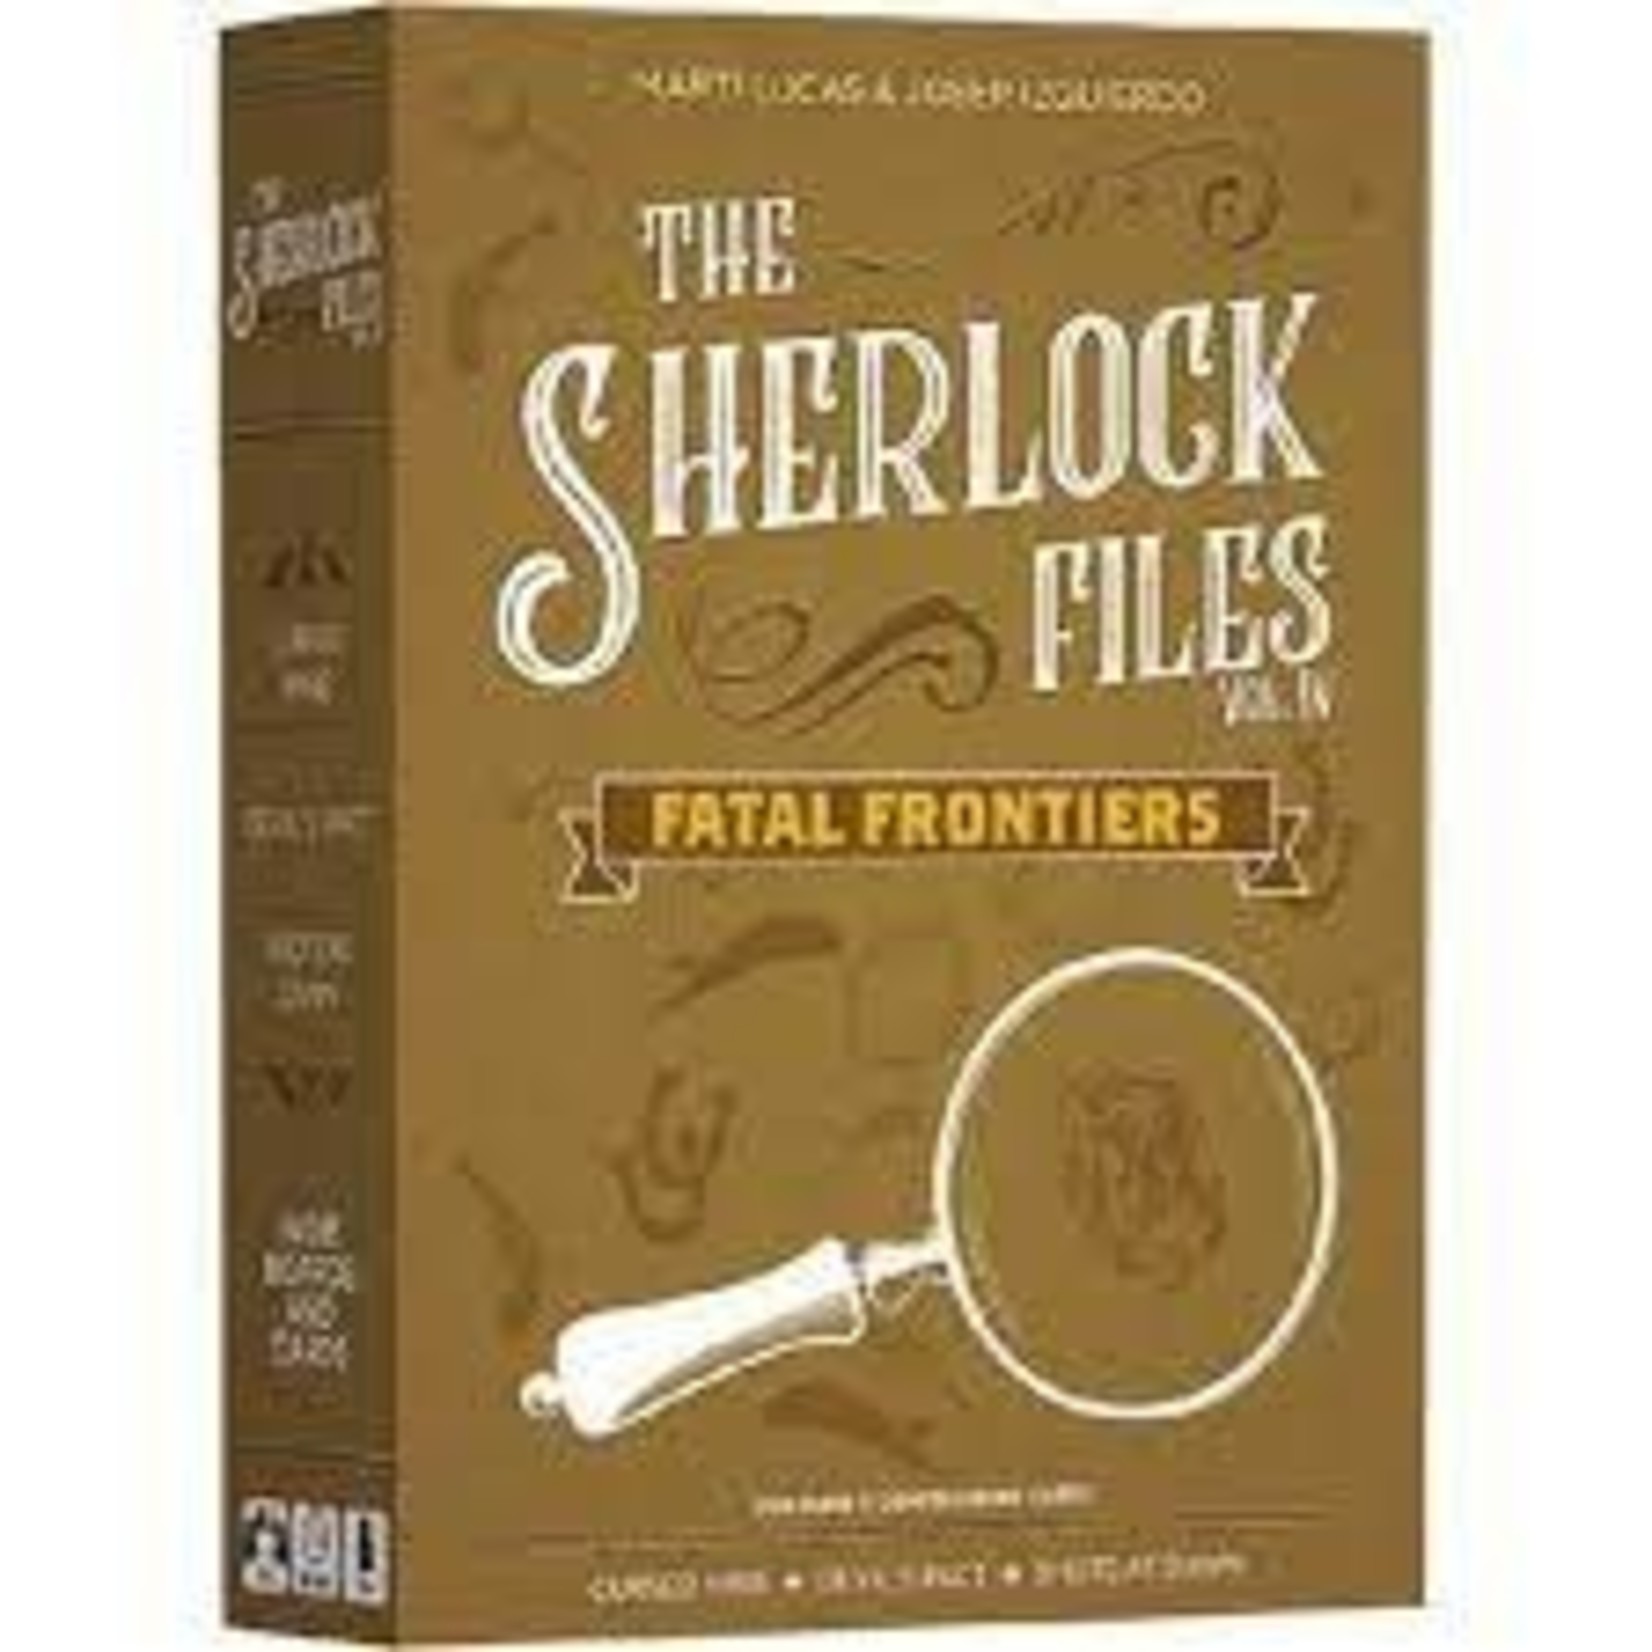 The Sherlock Files Vol. IV Fatal Frontiers